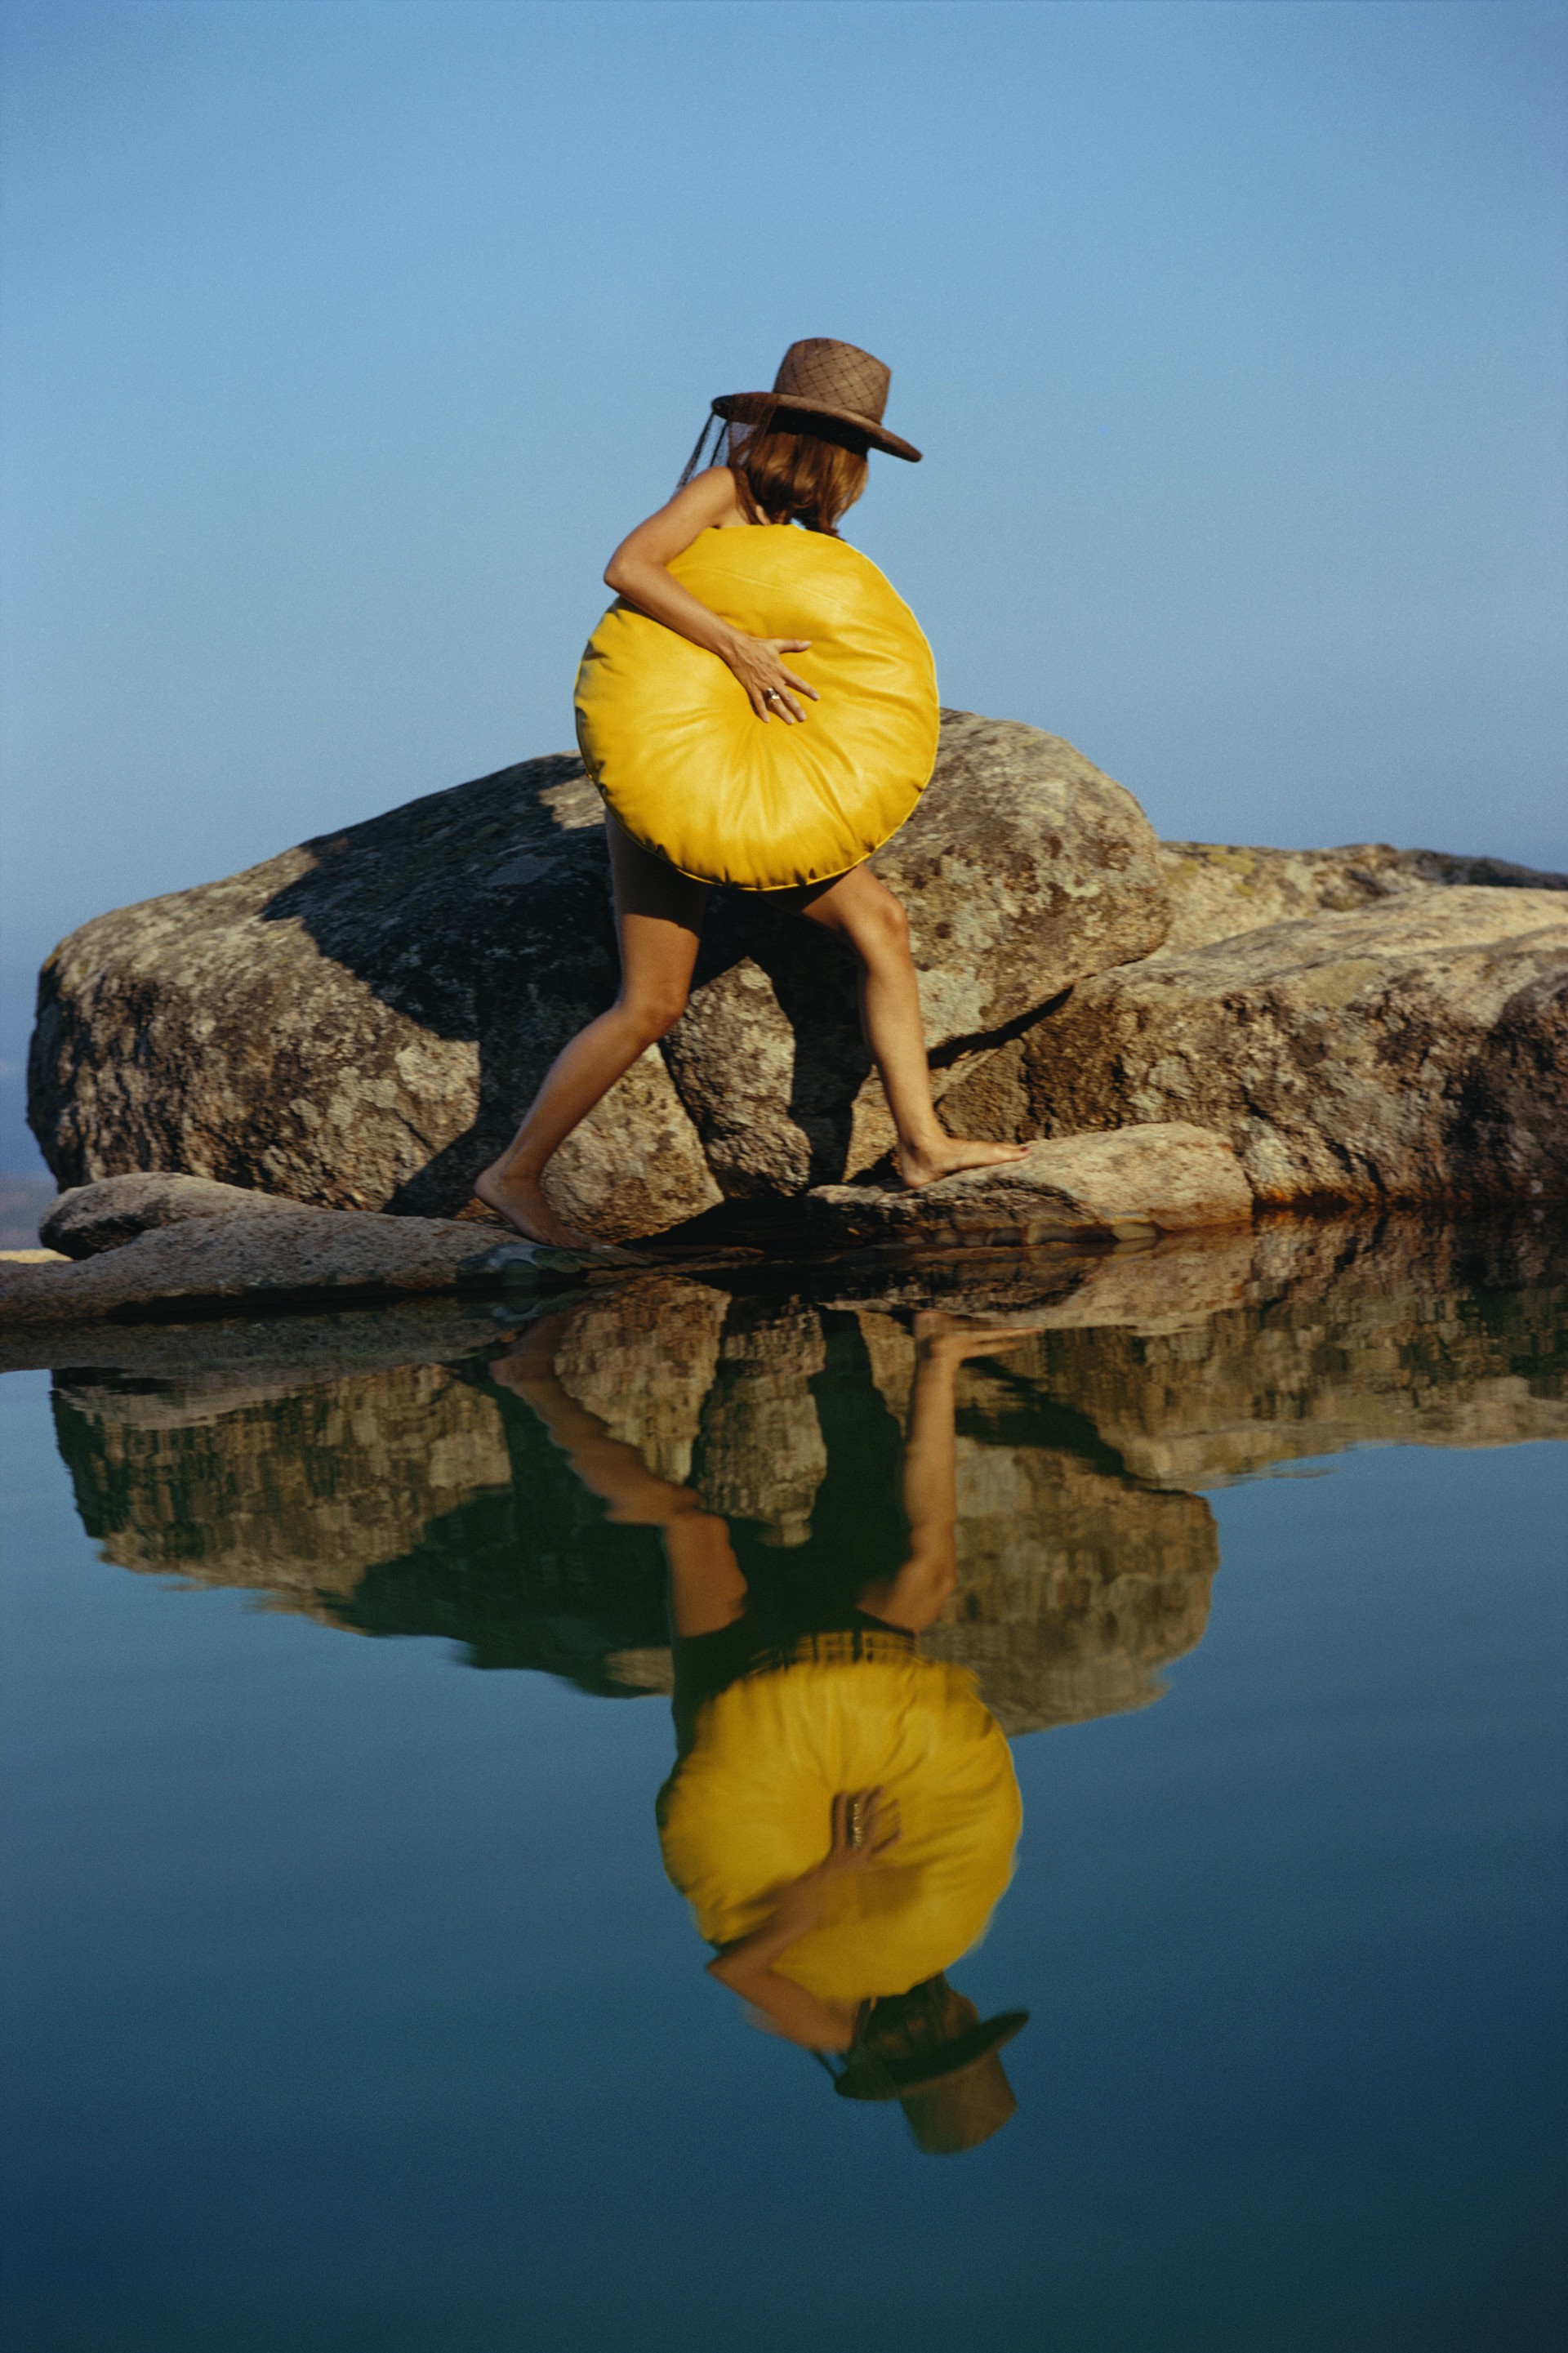 Finding A Spot by Slim Aarons